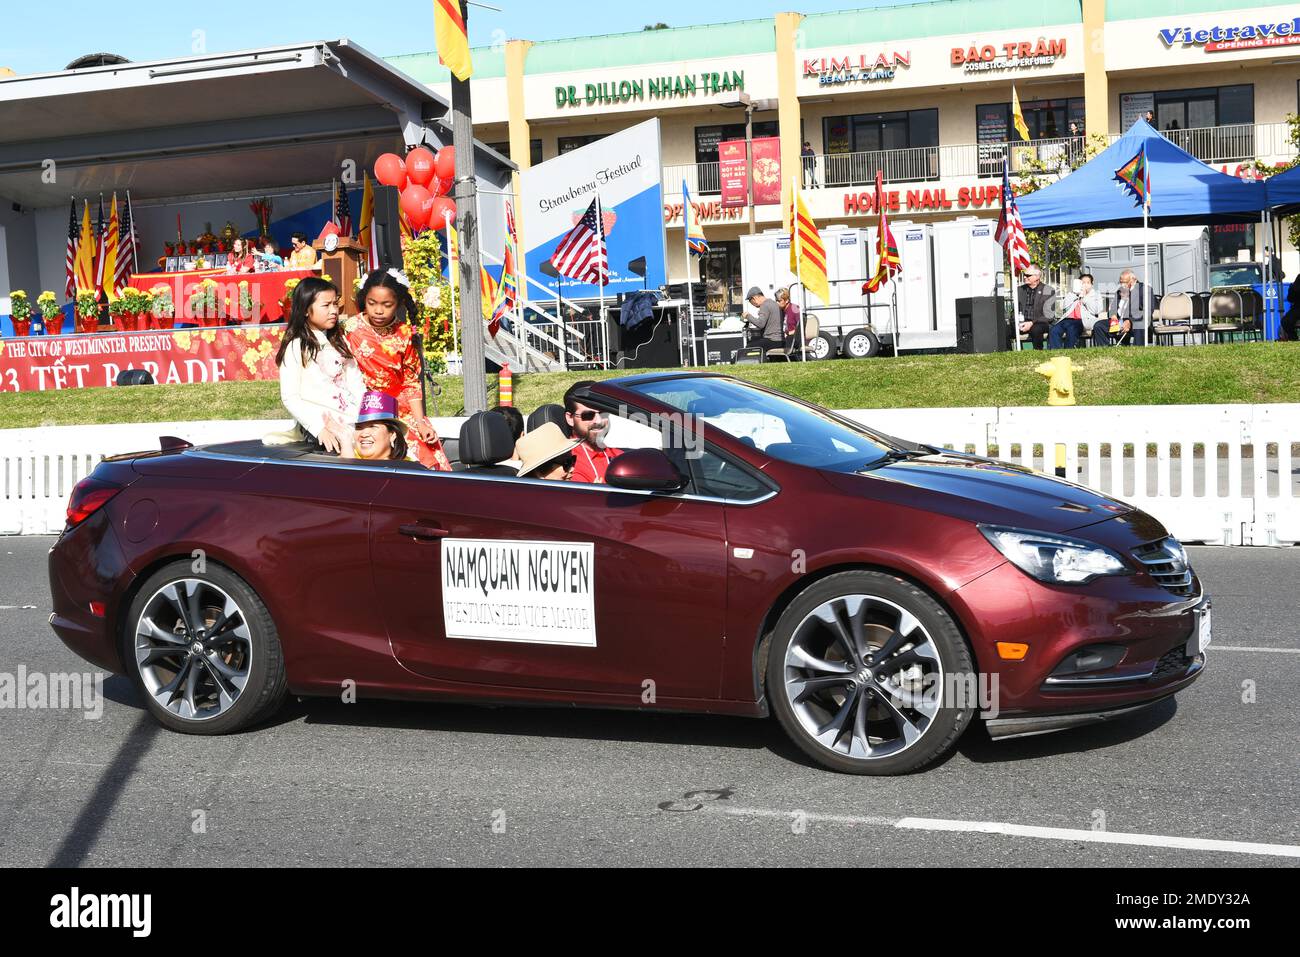 WESTMINSTER, CALIFORNIA - 22 JAN 2023: Westminster Vice Mayor Namquan Nguyen family rides in a car at the Tet Parade Celebrating the Year of the Cat. Stock Photo